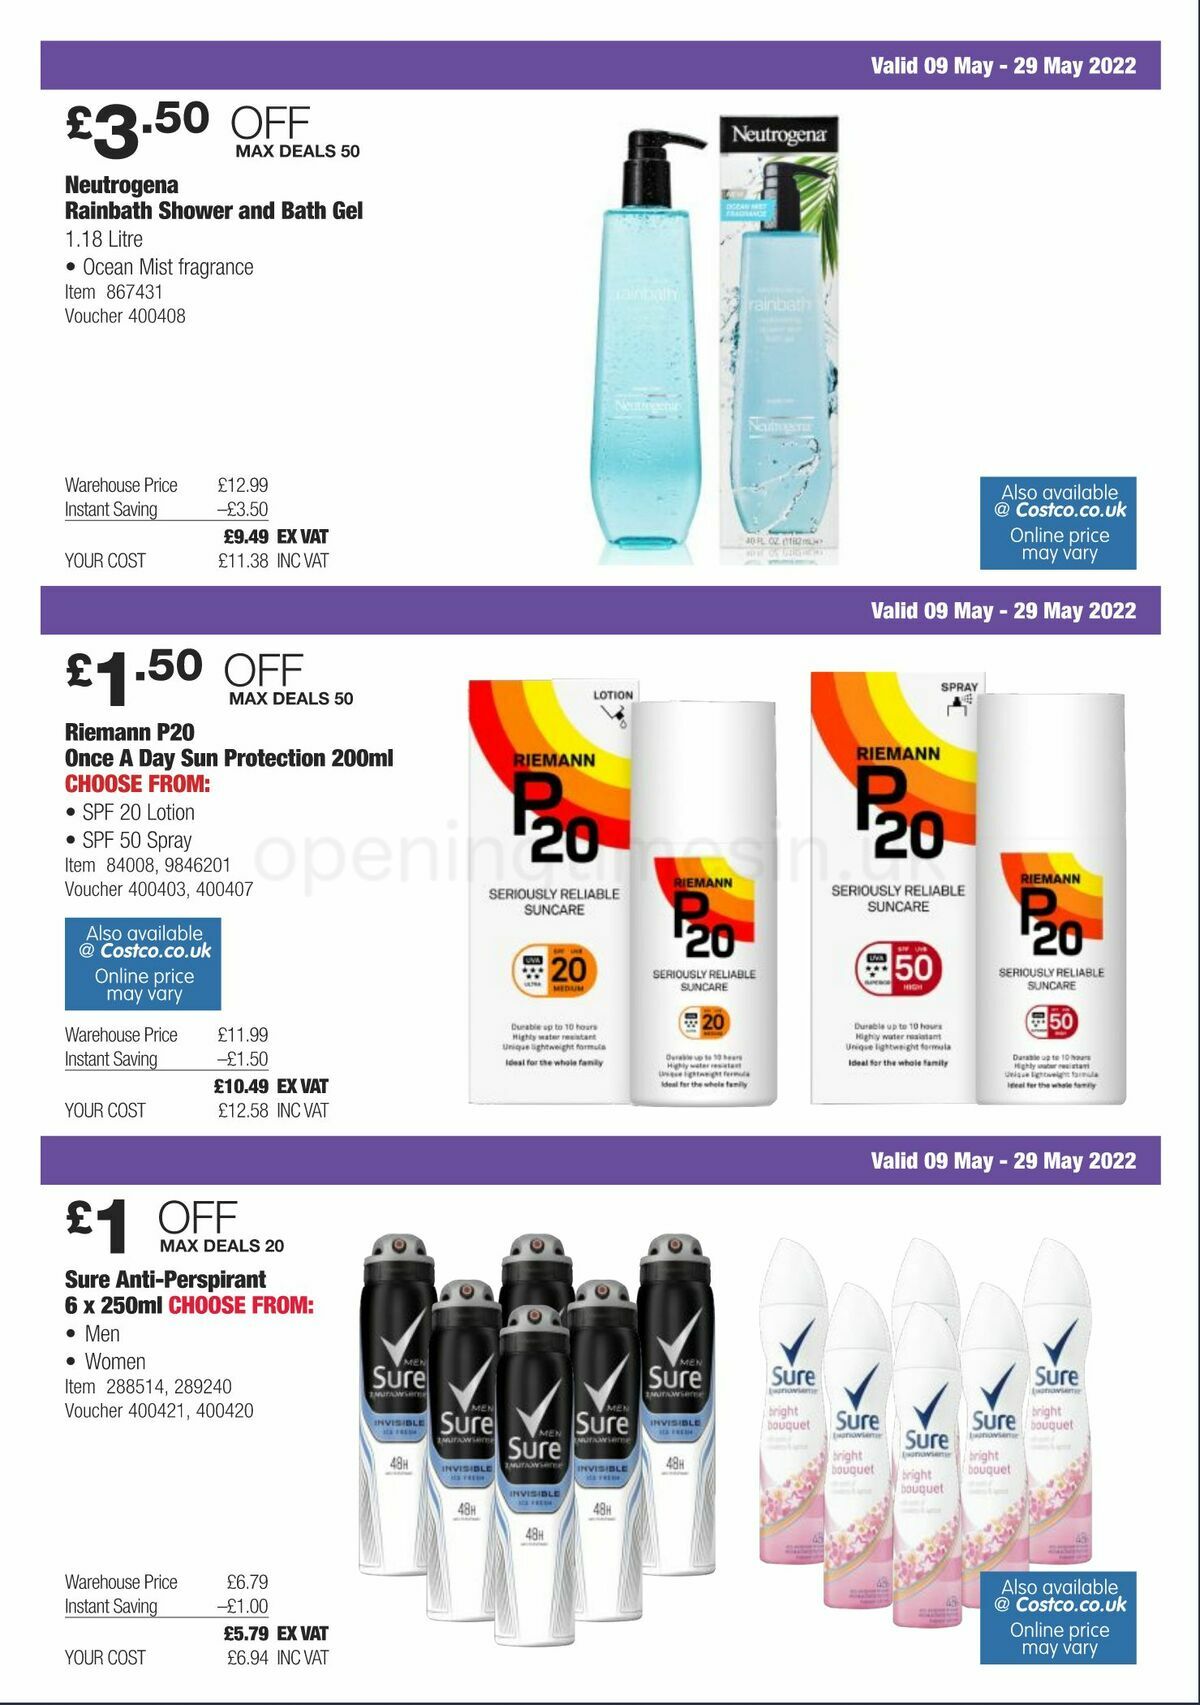 Costco Offers from 9 May